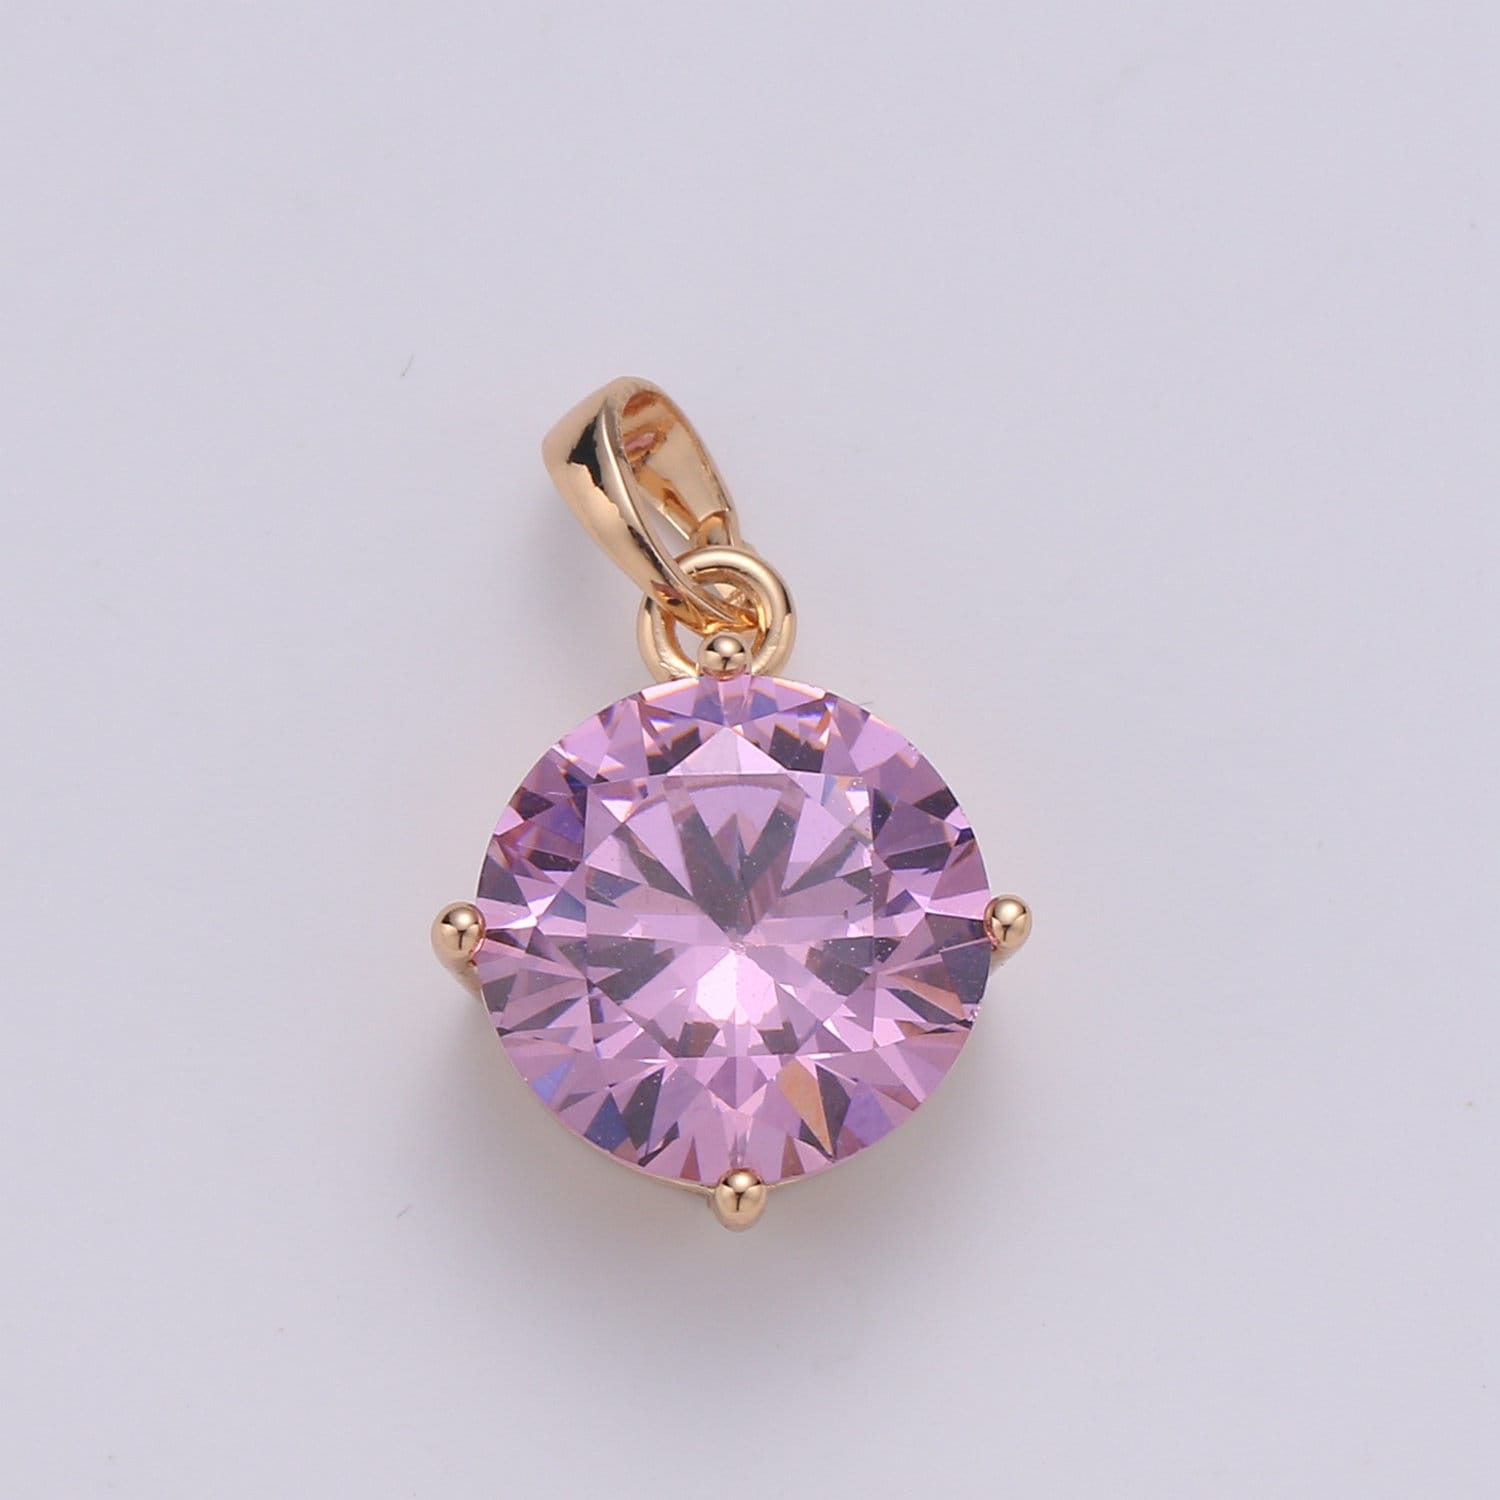 Amethyst Pink Cubic Zirconia Charm 18K Gold Round Charm Solitaire CZ Charm Necklace Bracelet Earrings Jewelry Making Supply CP1531